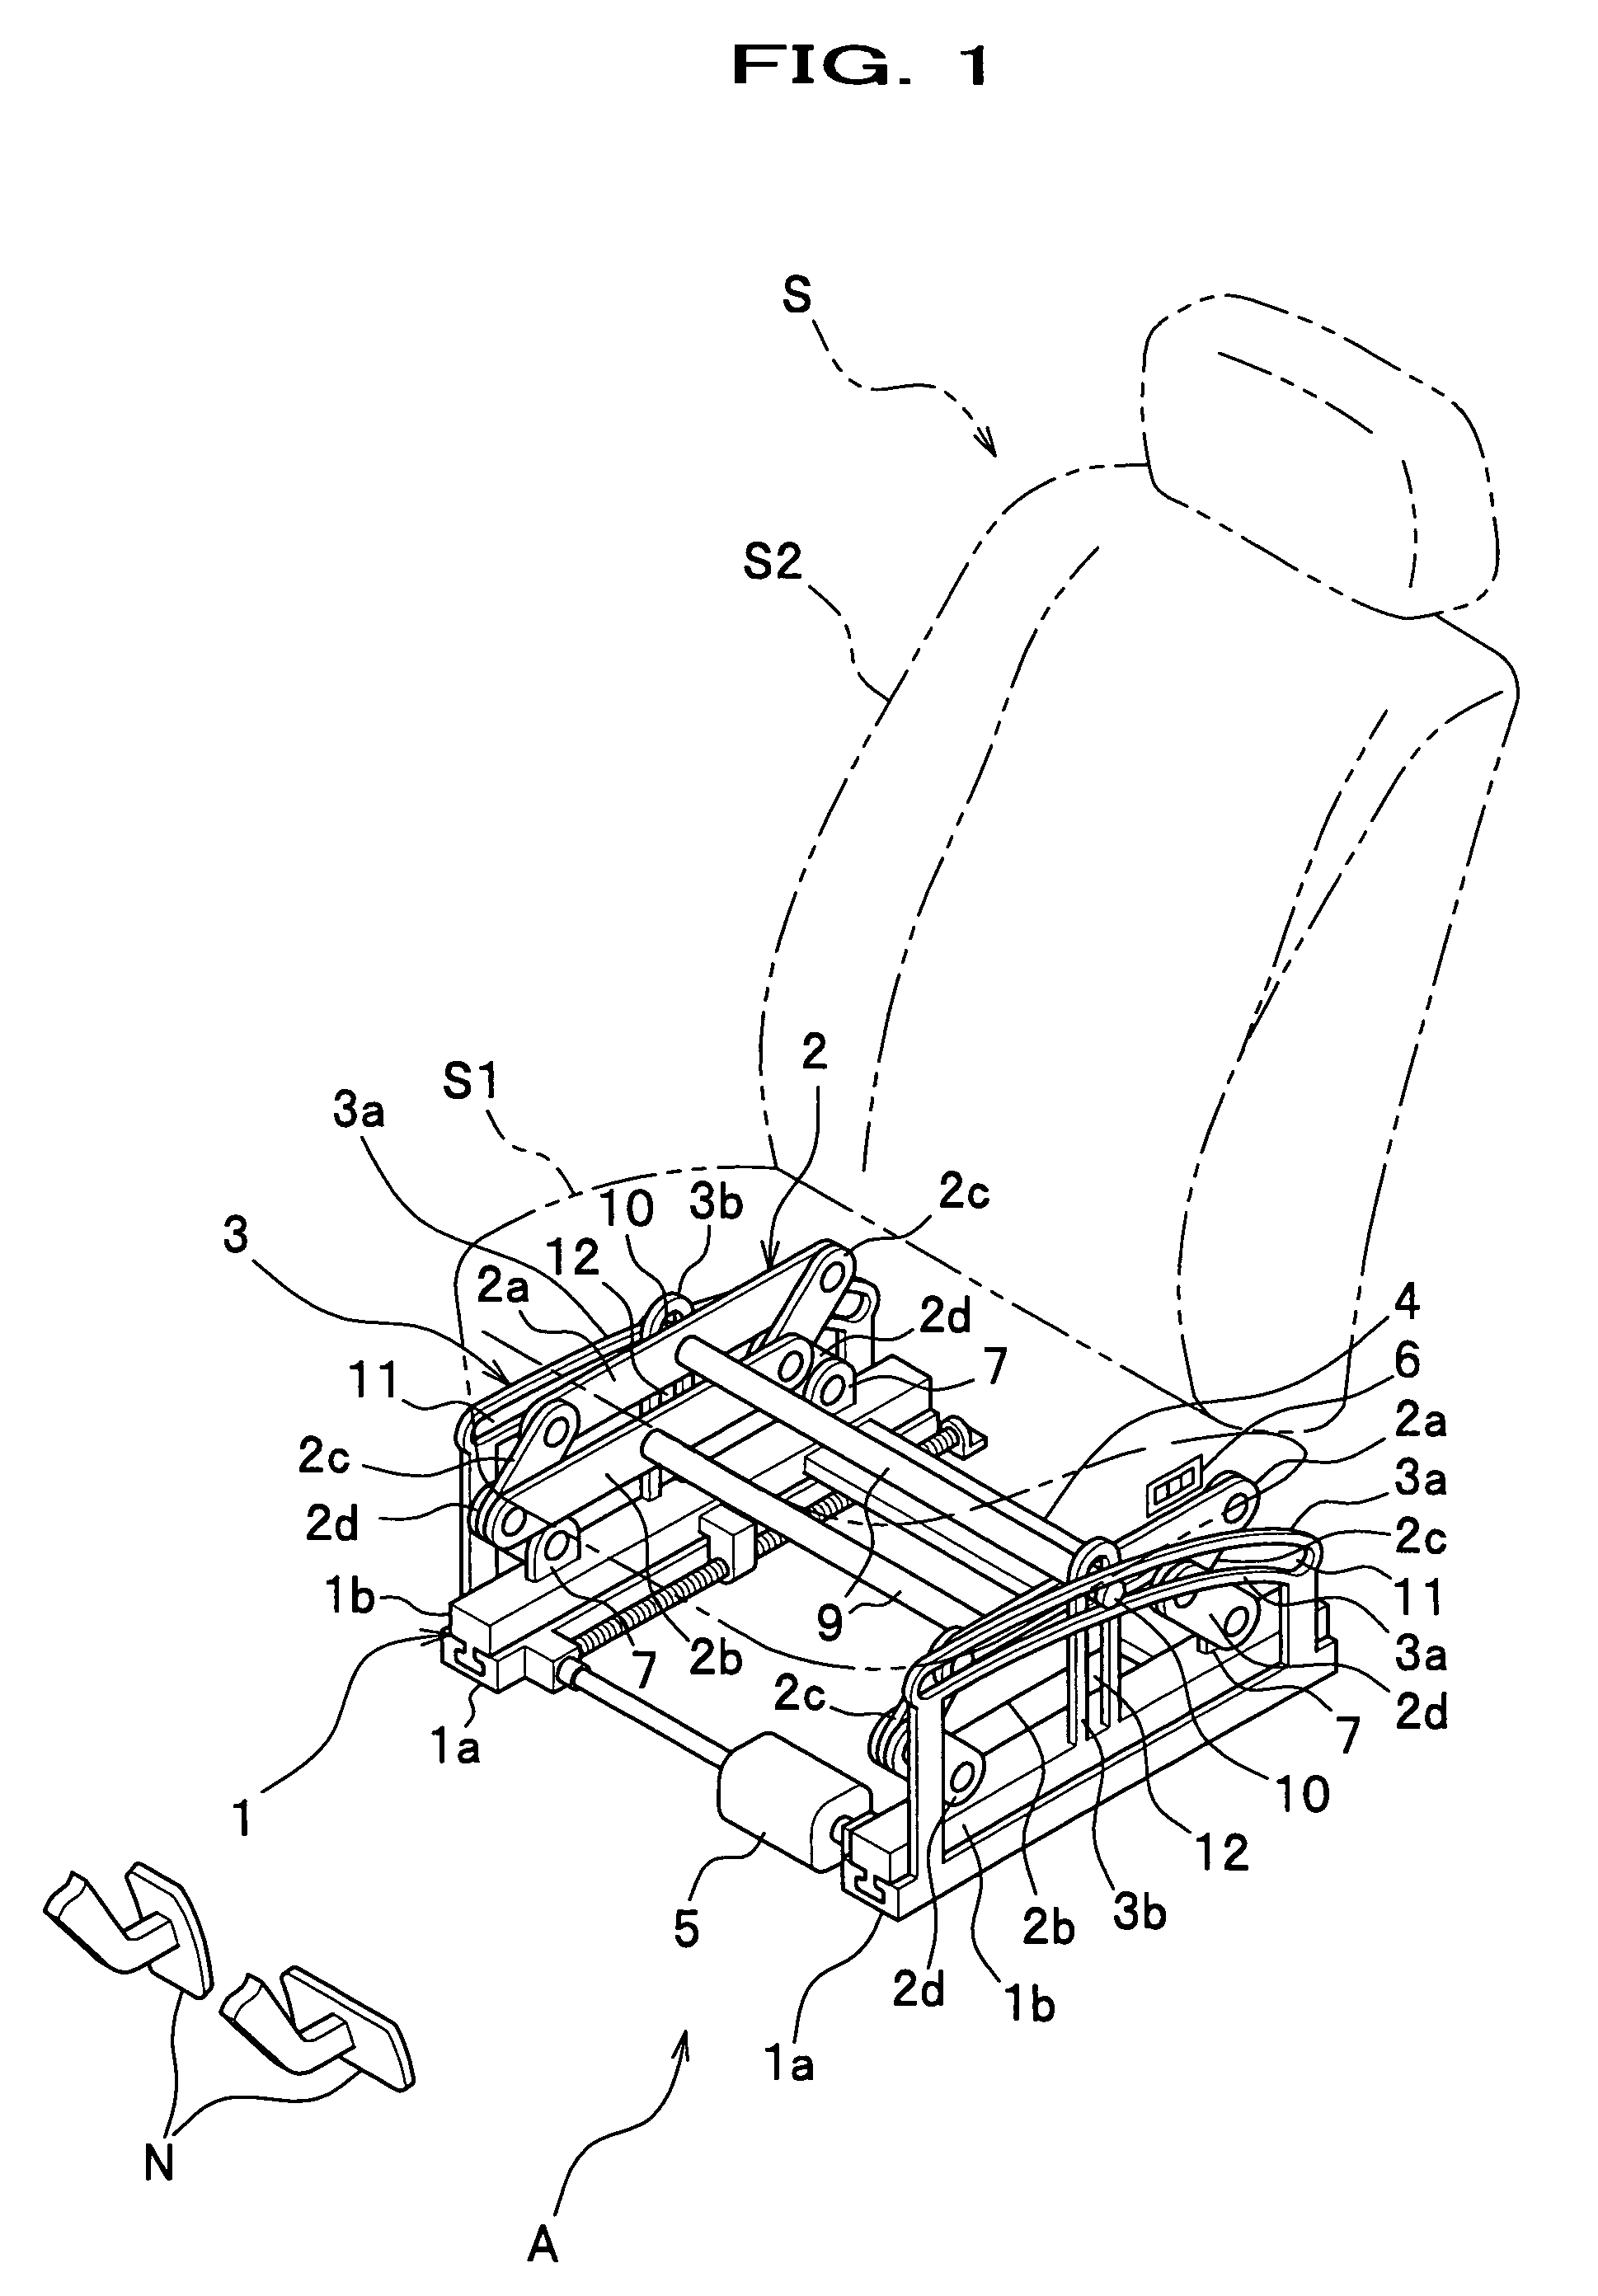 Seat apparatus for vehicles